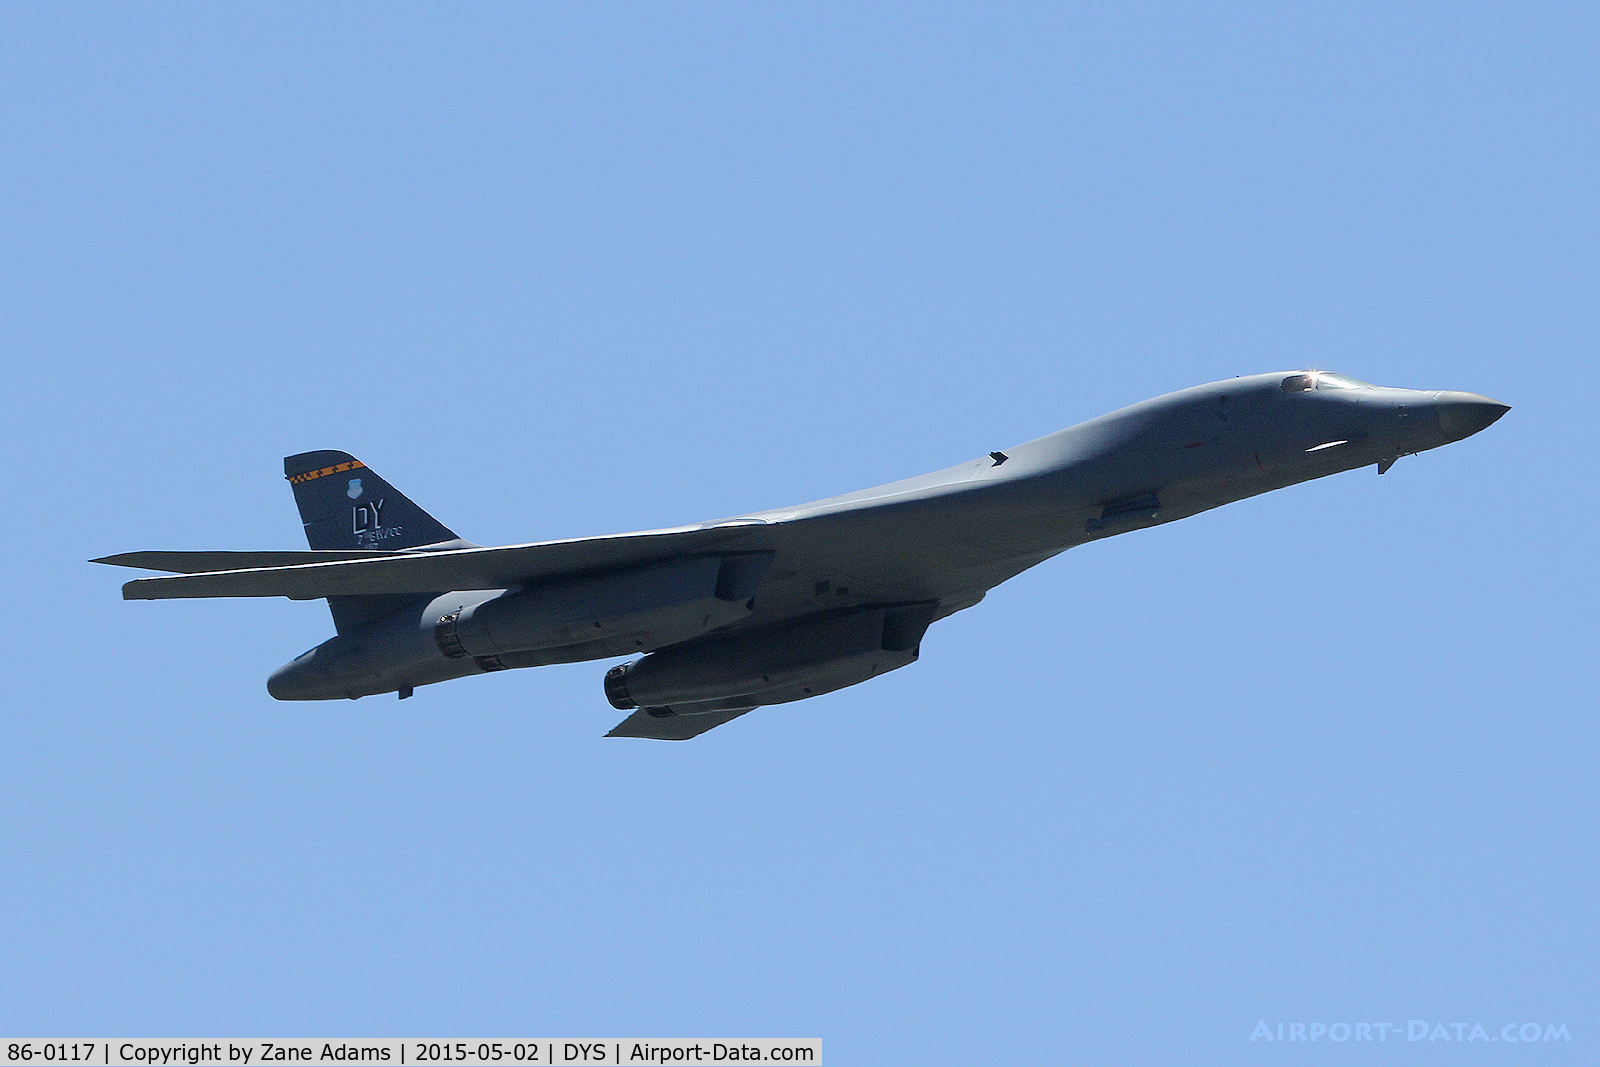 86-0117, 1986 Rockwell B-1B Lancer C/N 77, At the 2015 Big Country Airshow, Dyess AFB, TX